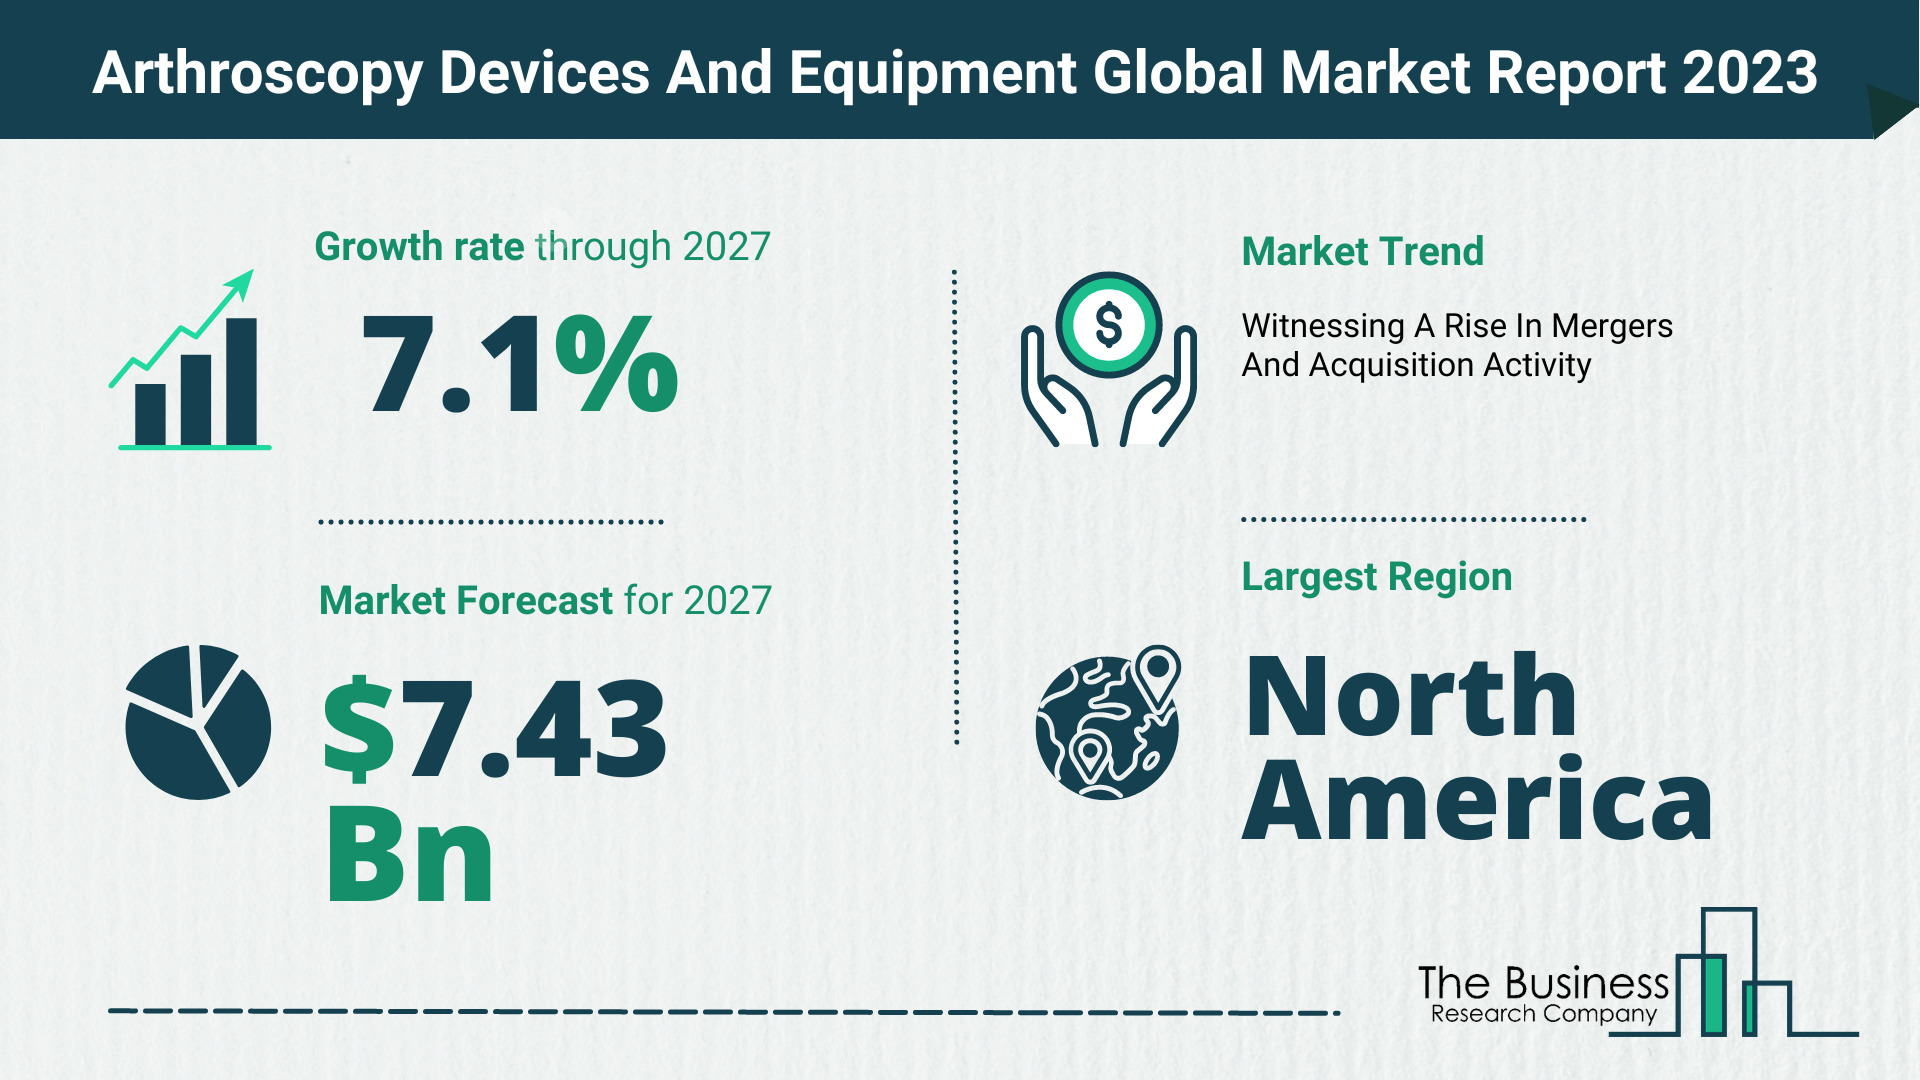 What Will The Arthroscopy Devices And Equipment Market Look Like In 2023?